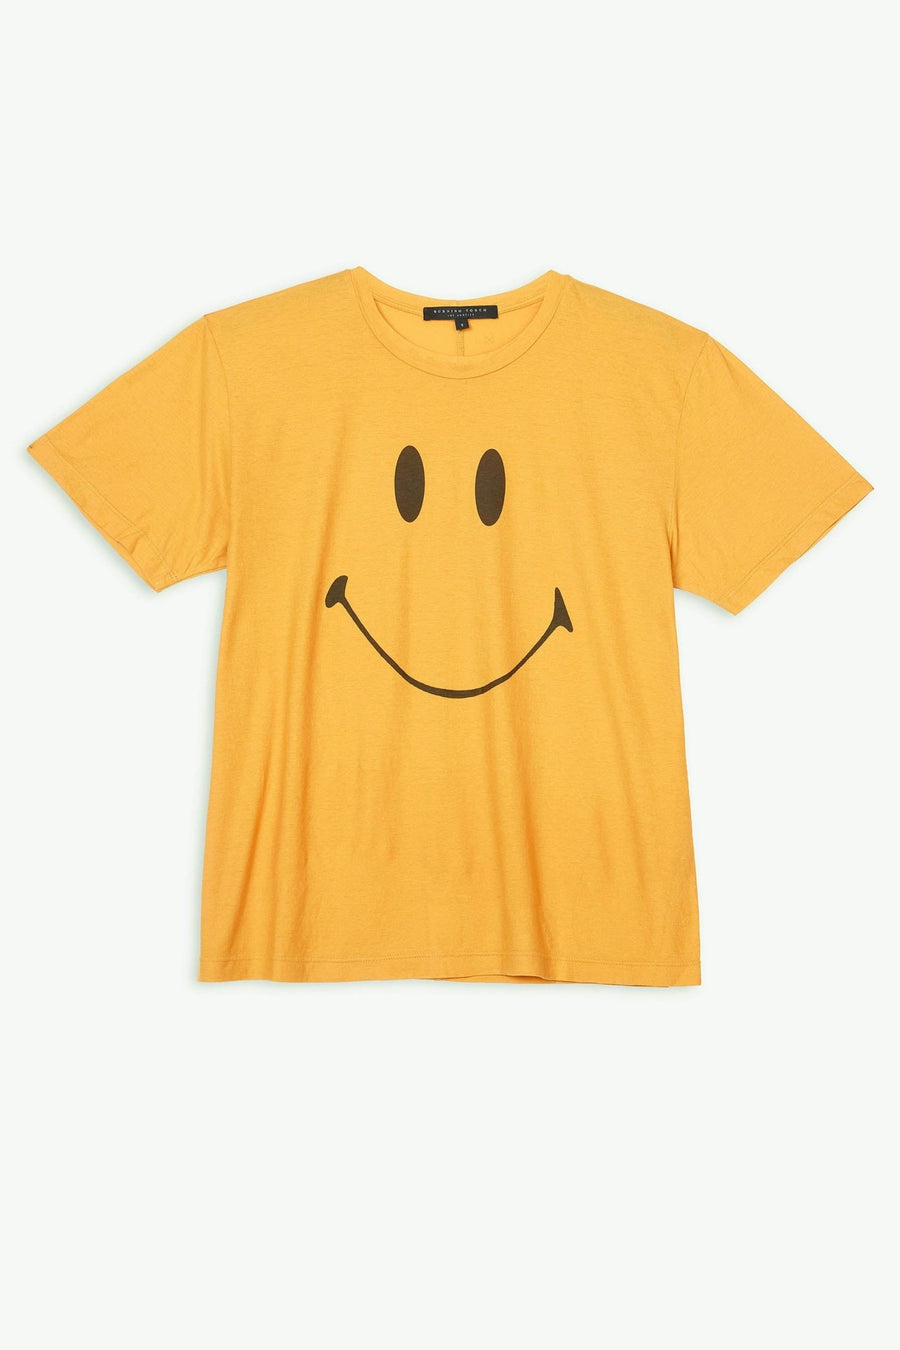 SMILEY FACE TEE, GOLD - Burning Torch Online Boutique